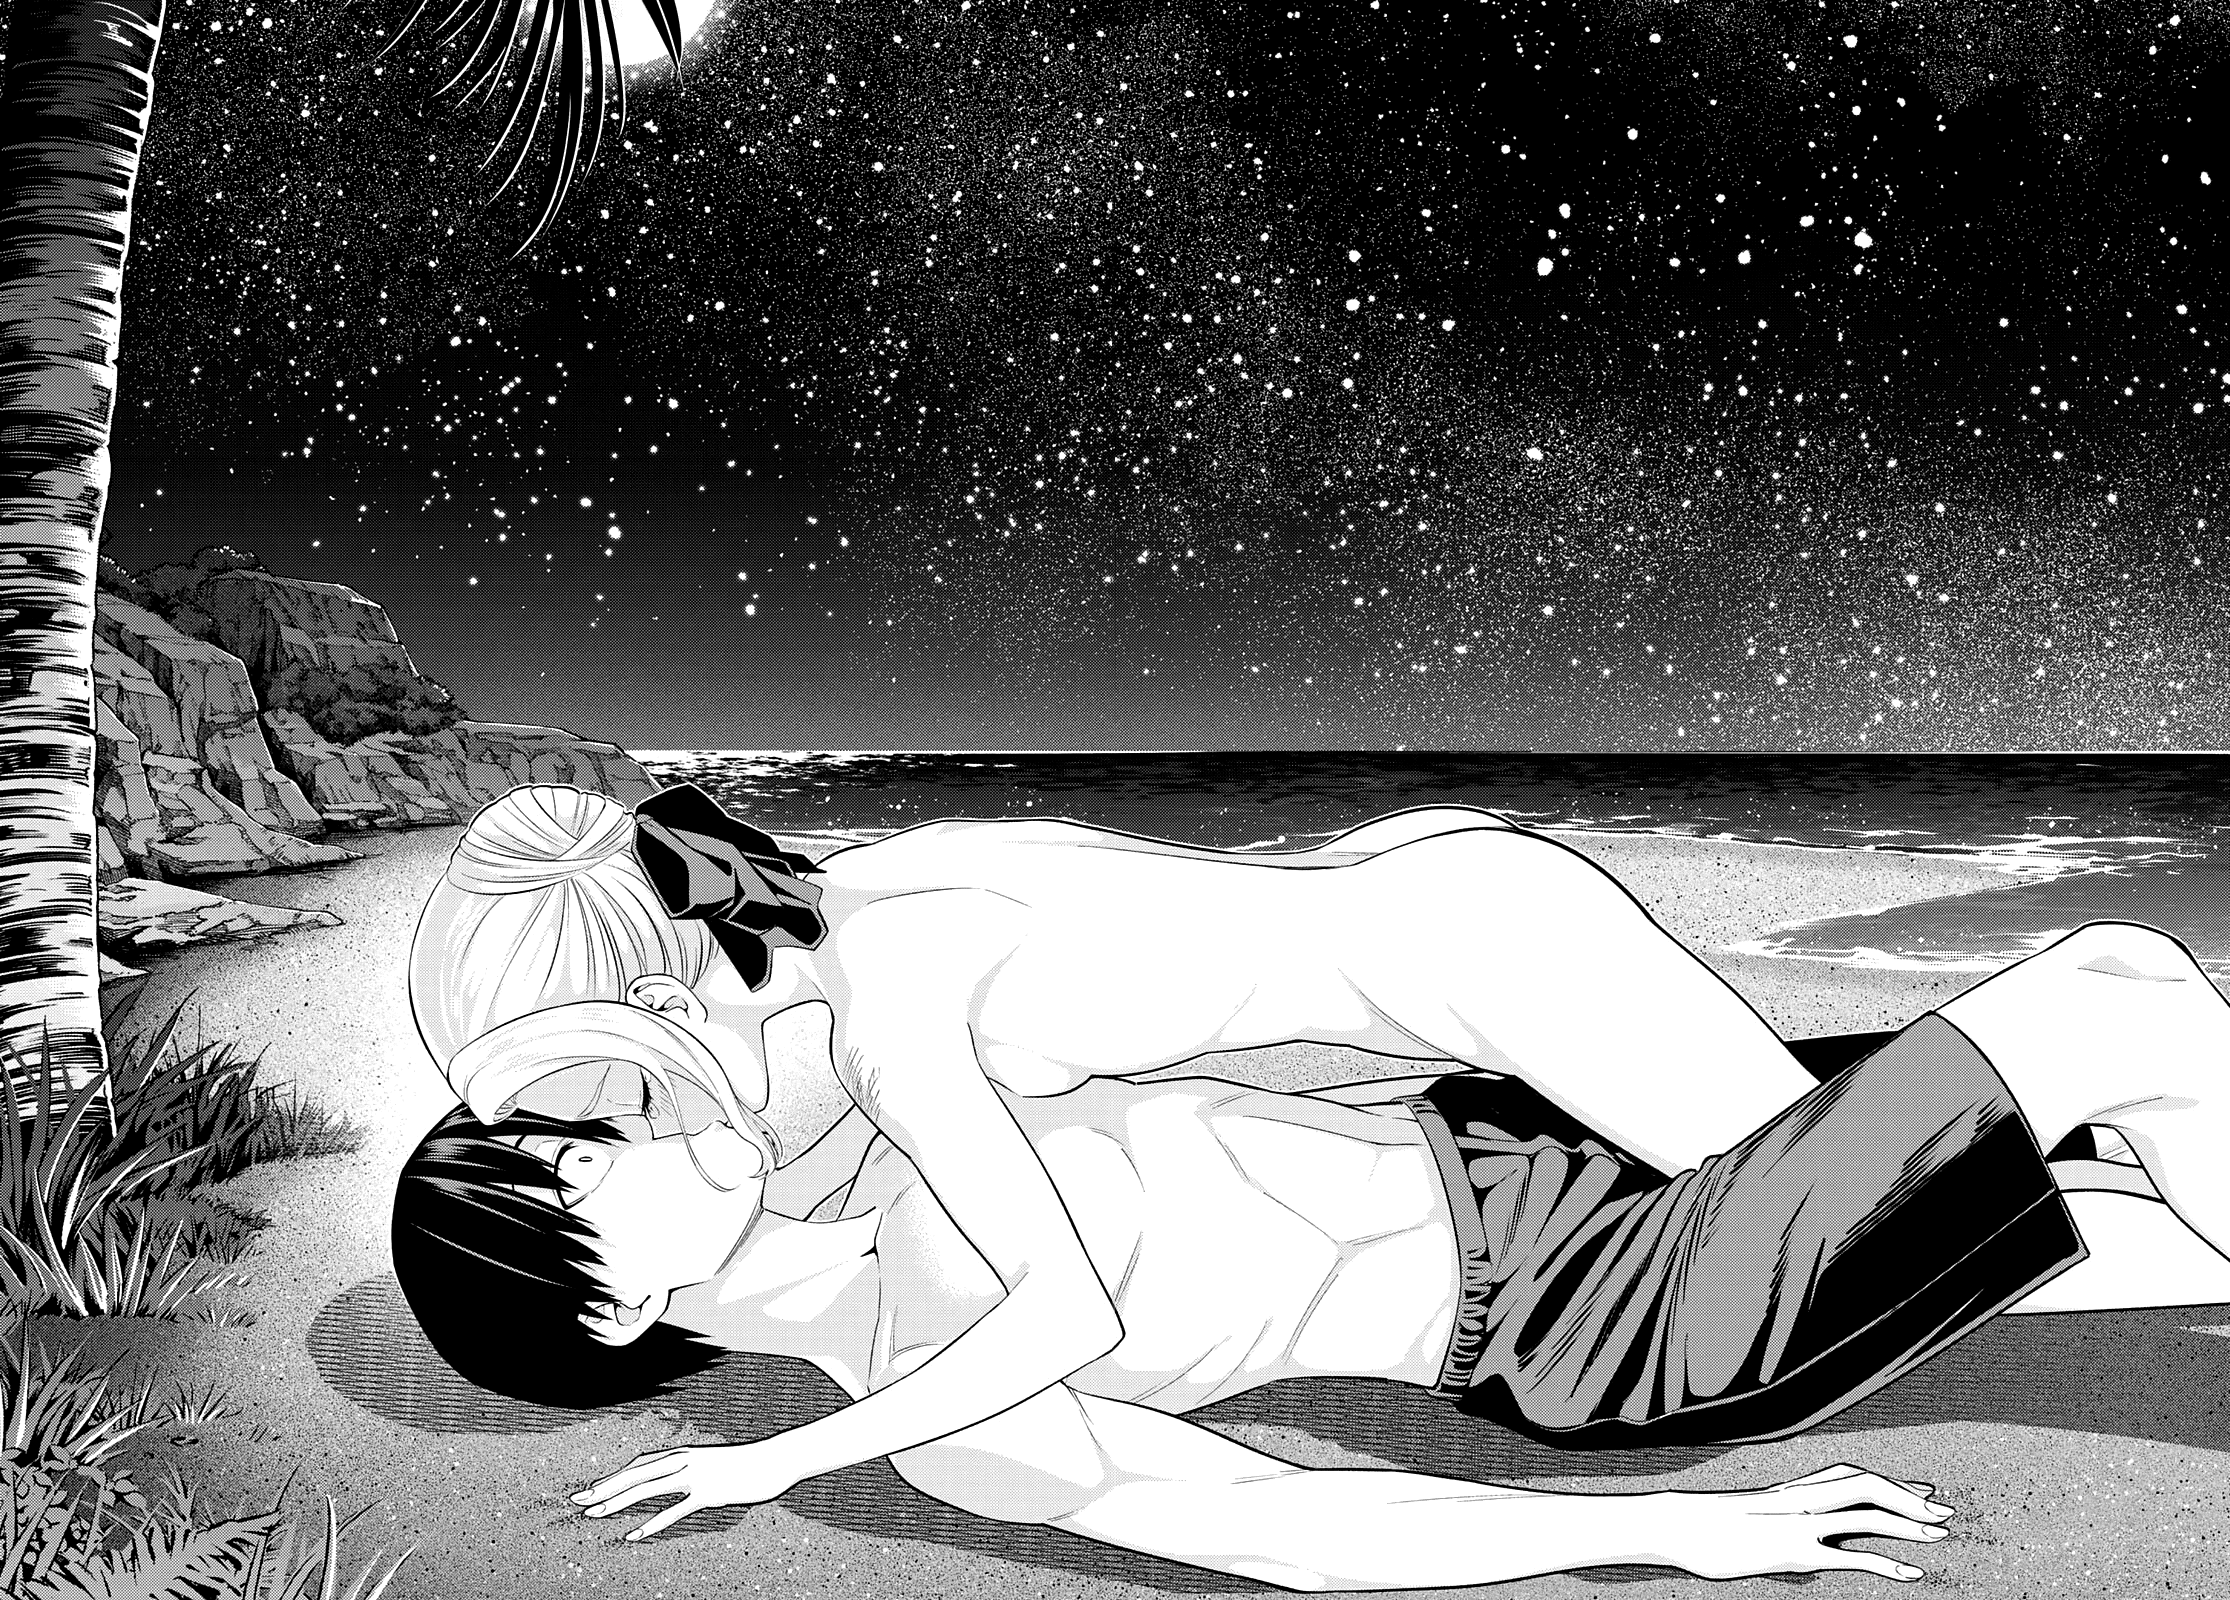 Explore the limits of your imagination with our collection of yaoi manga sex art!